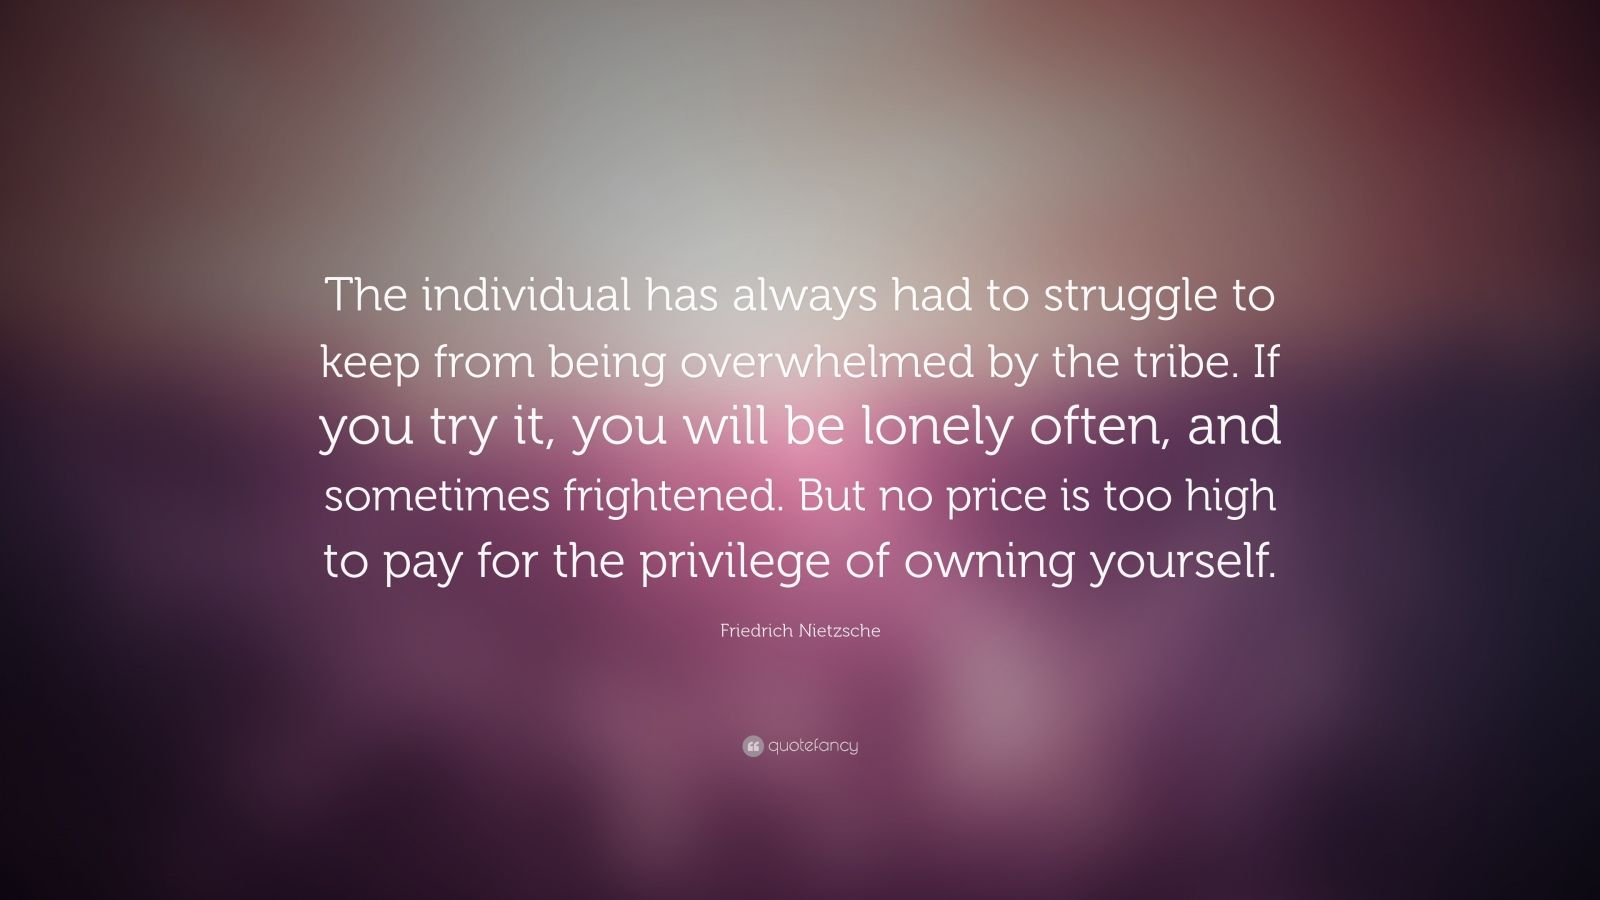 Friedrich Nietzsche Quote: “The individual has always had to struggle ...